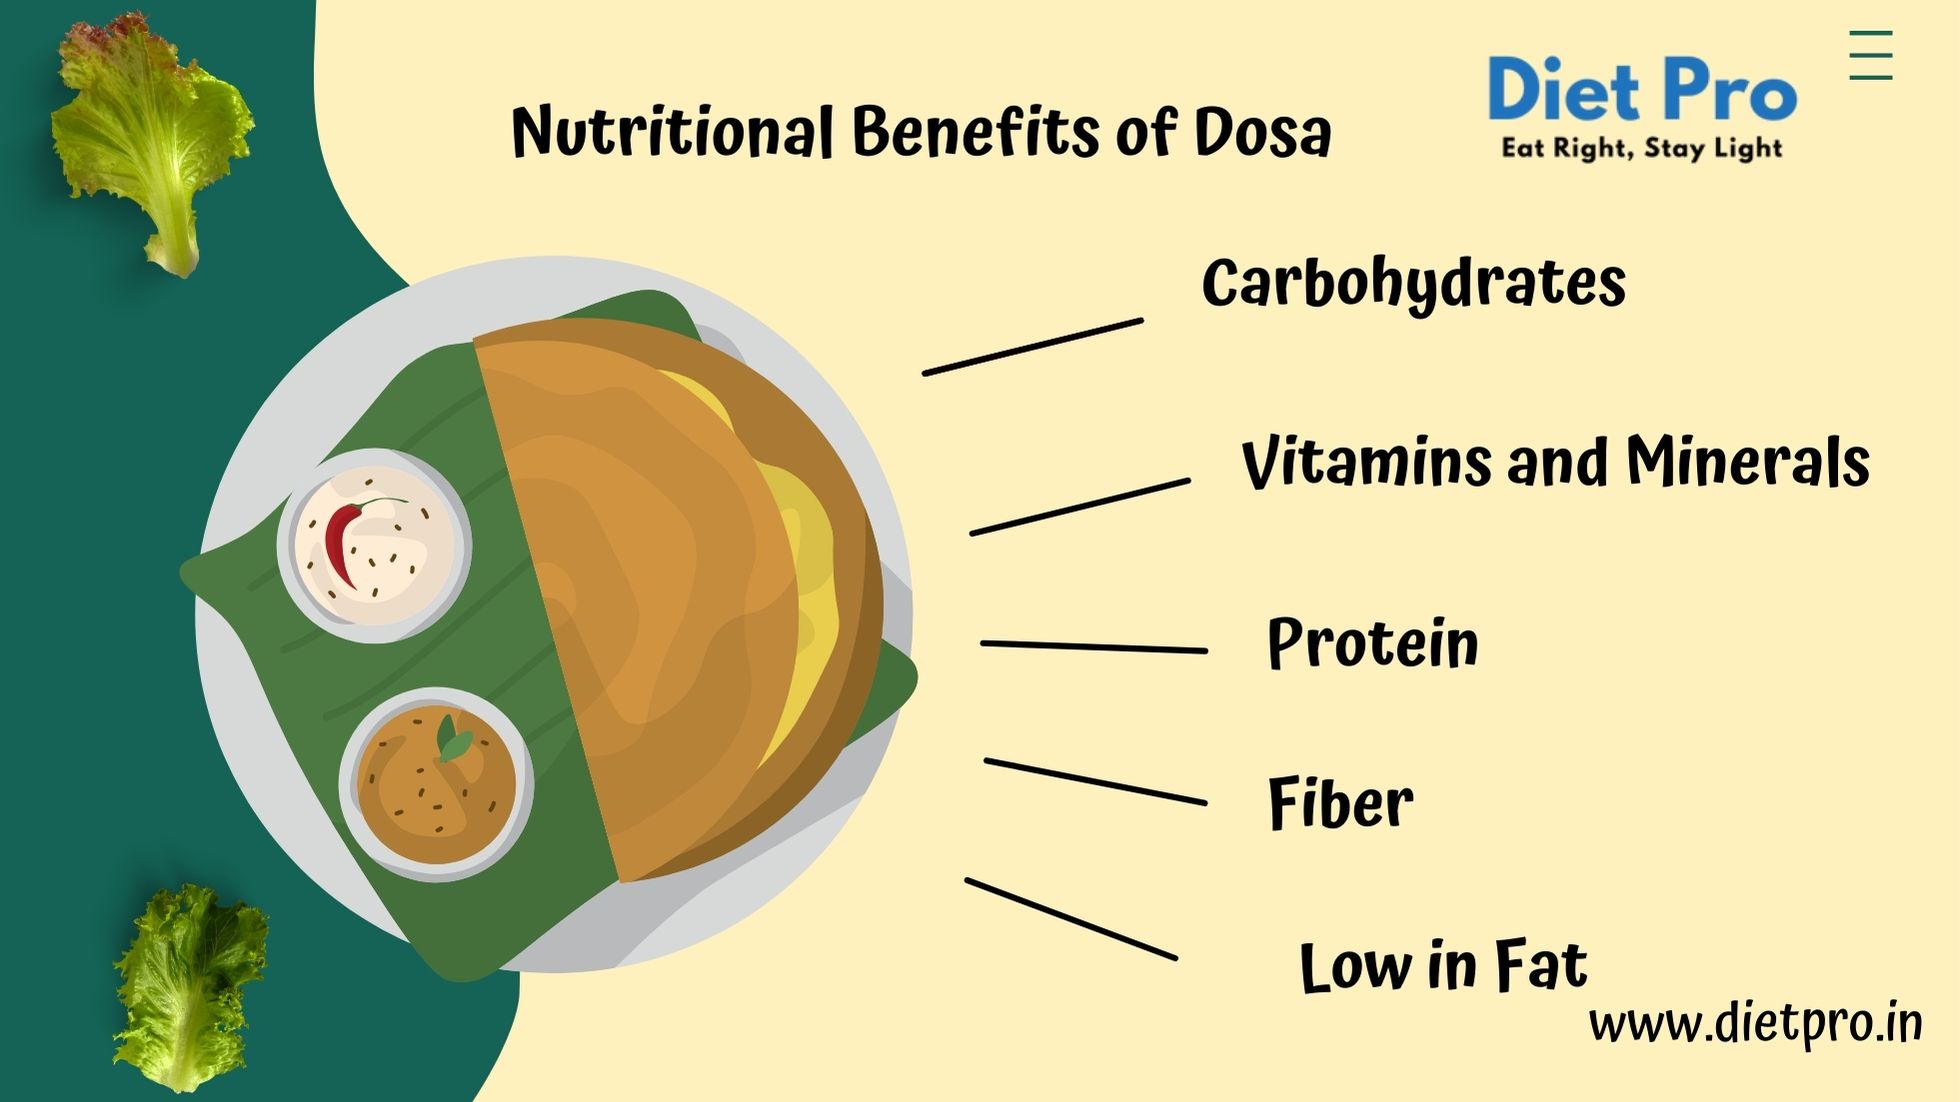 Calories in Dosa benefits